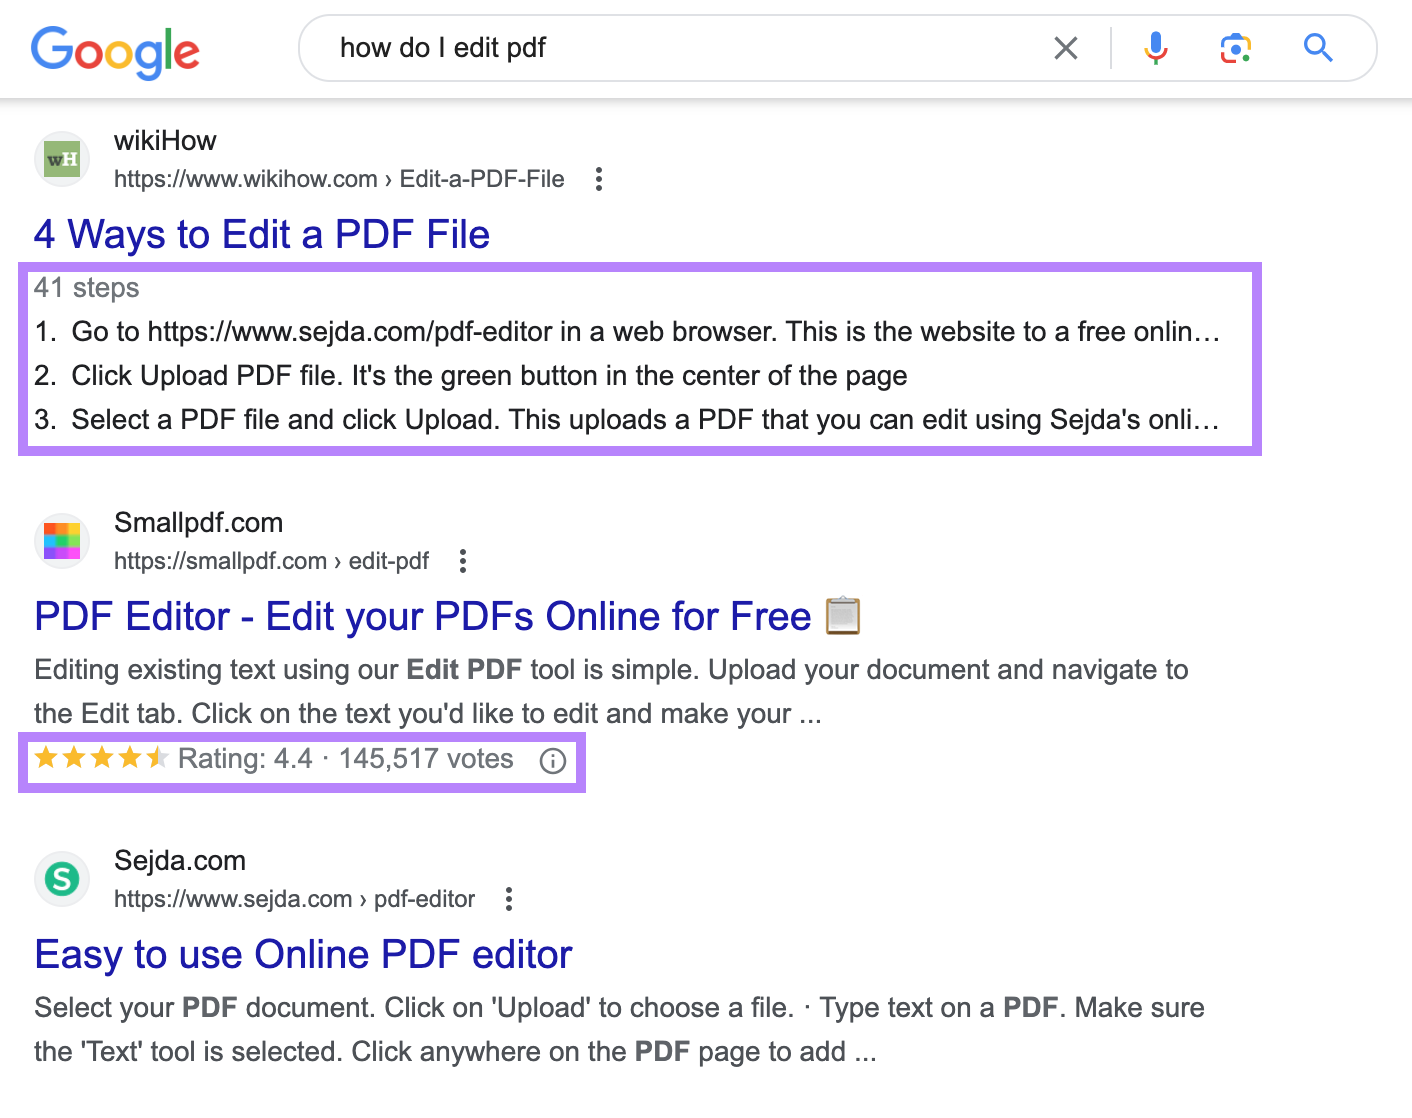 an example of different SERP features in Google SERP for "،w do i edit pdf"